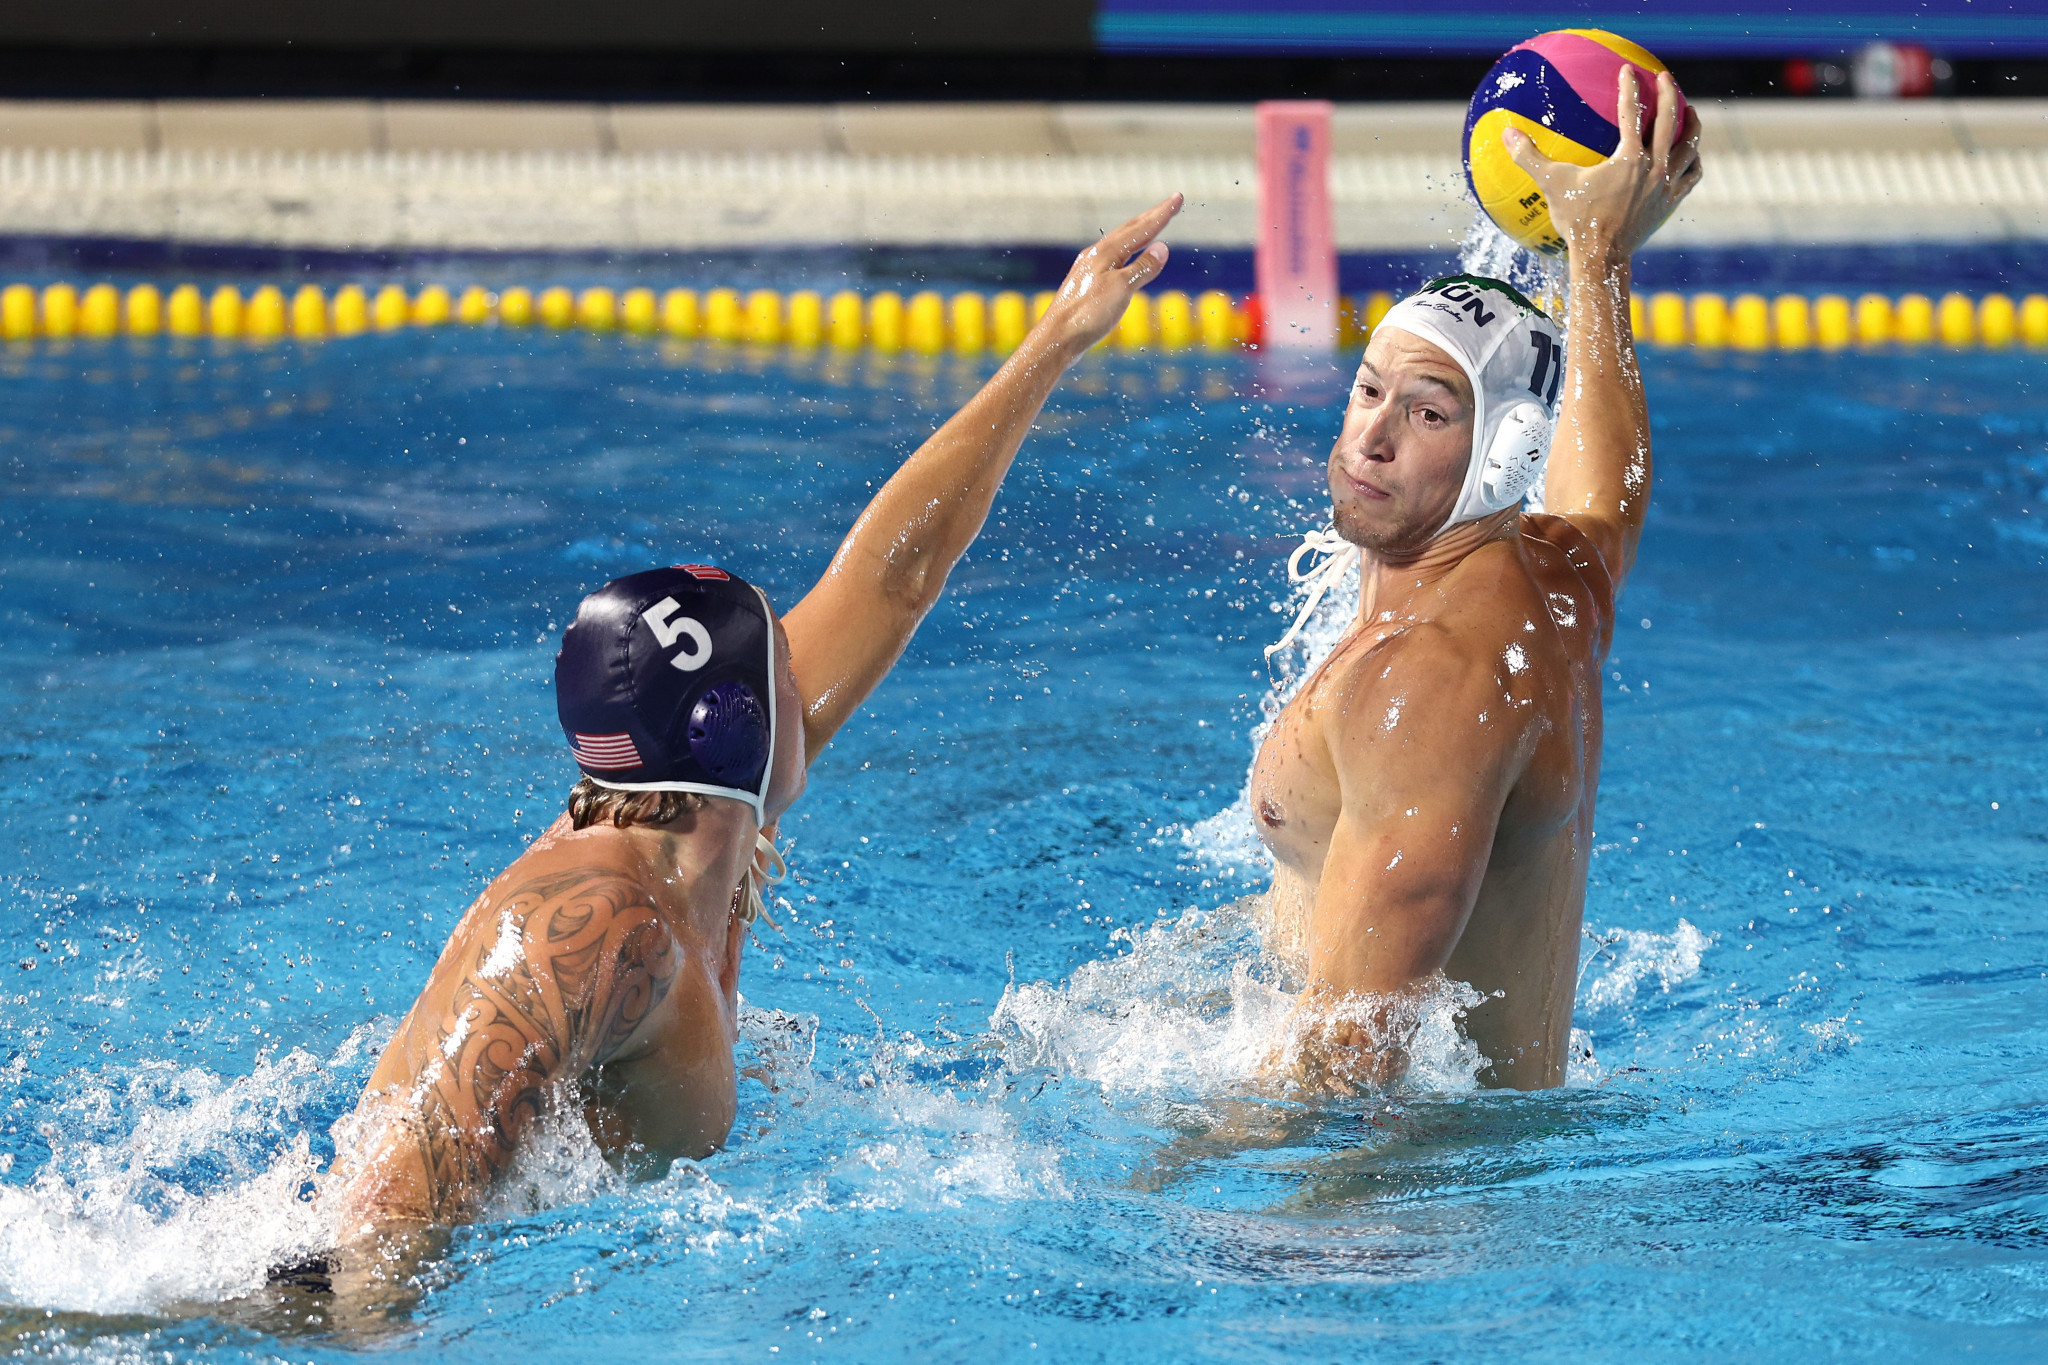 Jansik nets five in Hungary quarter-final win at Men’s European Water Polo Championship